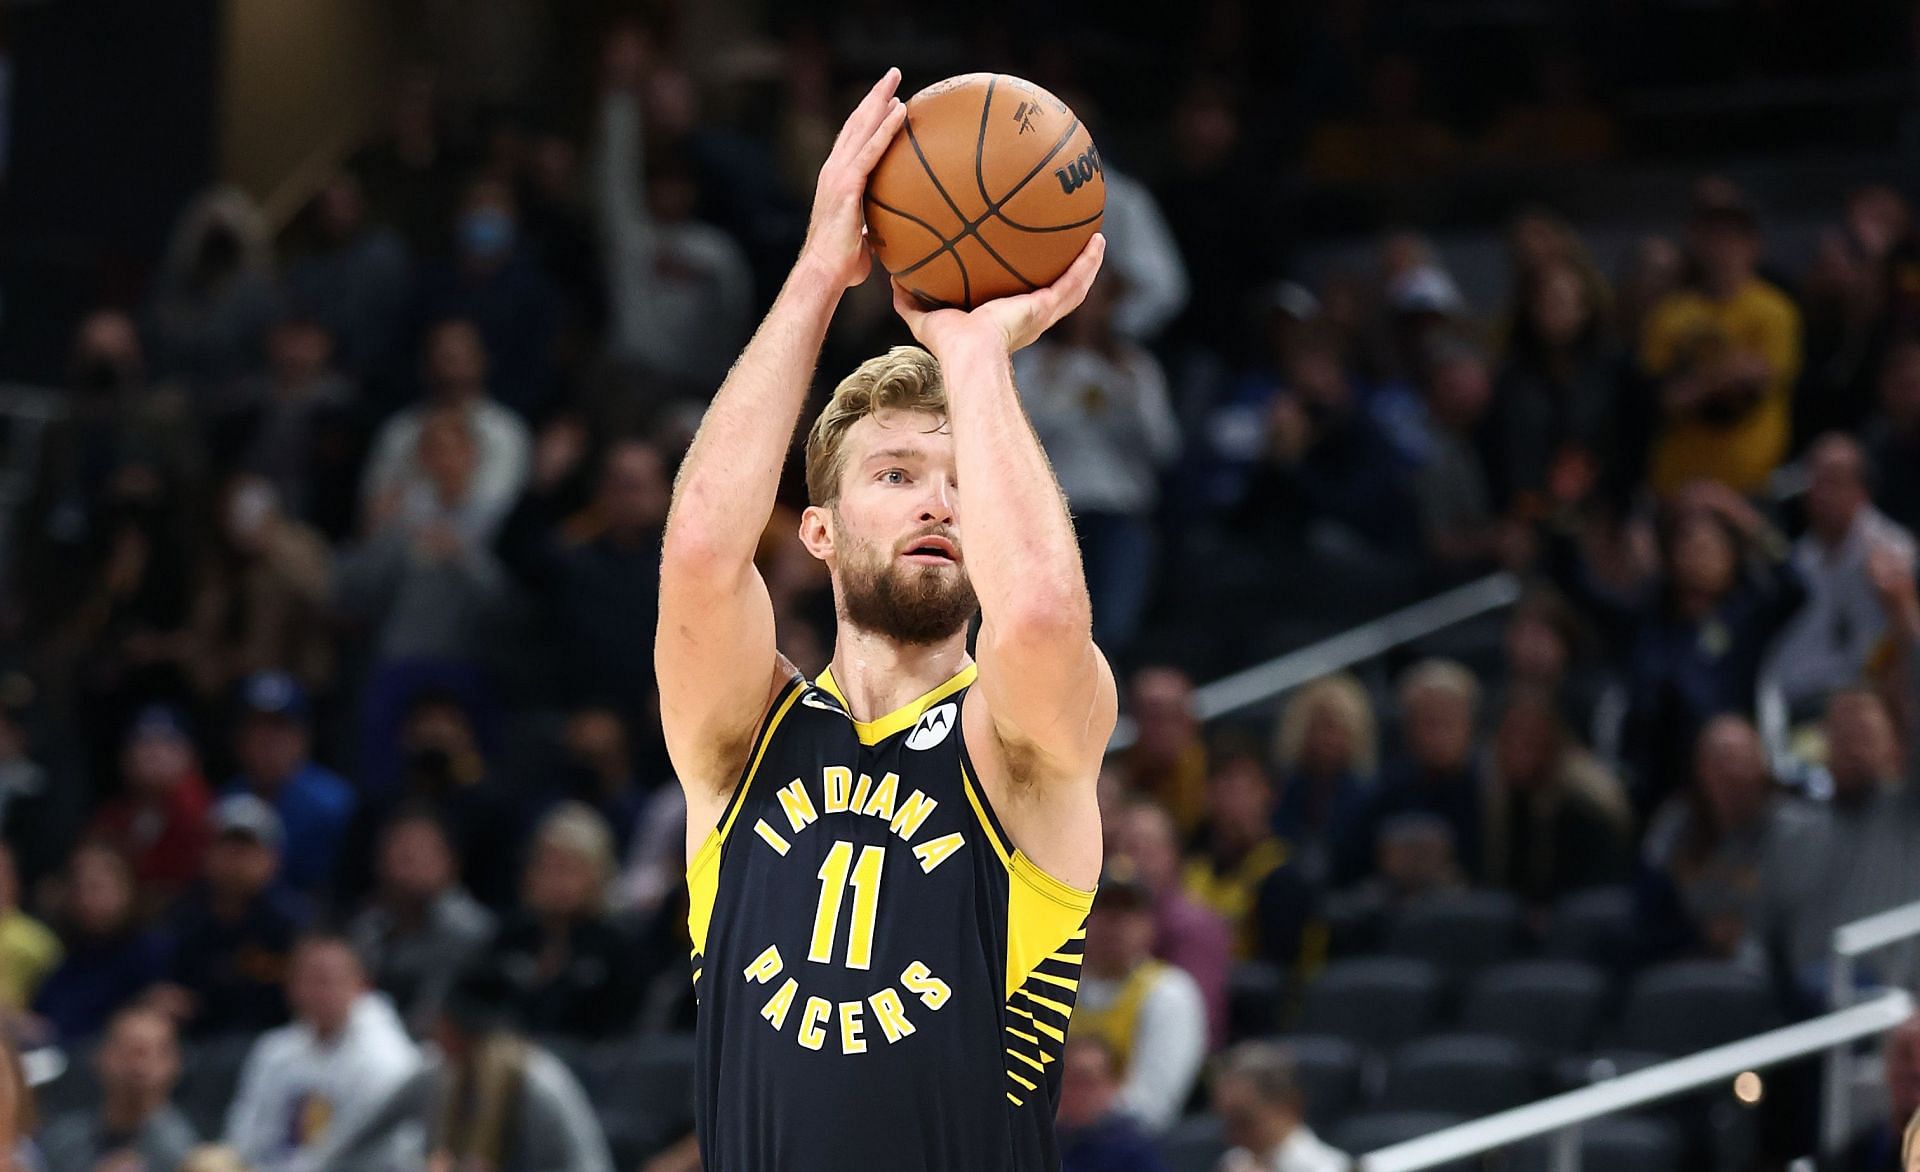 Domantas Sabonis of the Indiana Pacers.